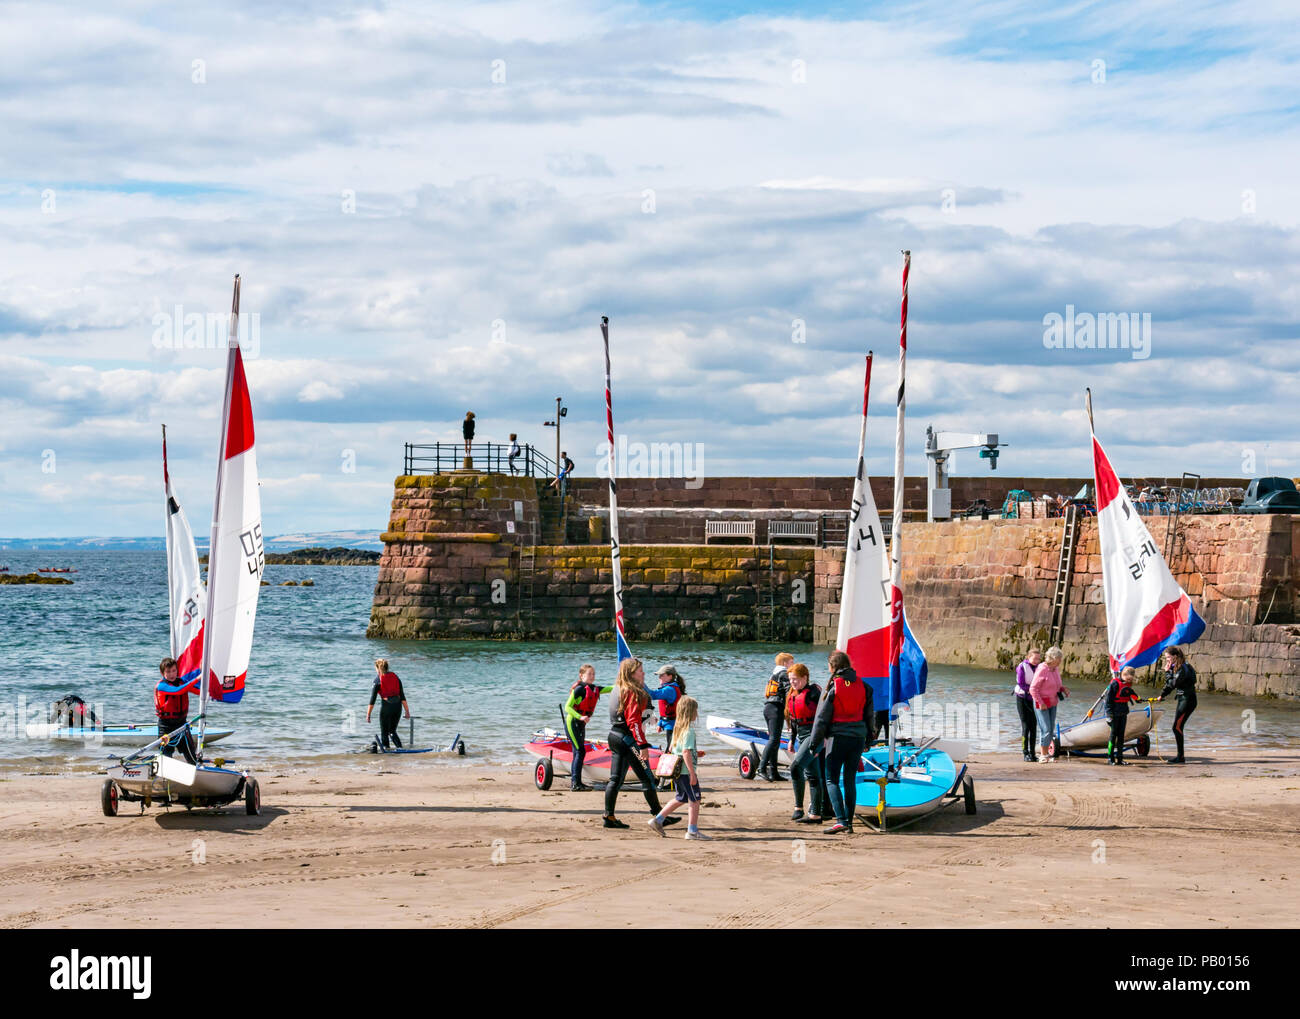 Boat club with people pulling sailing dinghies out of sea onto trailers at West bay beach with harbour wall and entrance, North Berwick, East Lothian, Scotland, UK Stock Photo